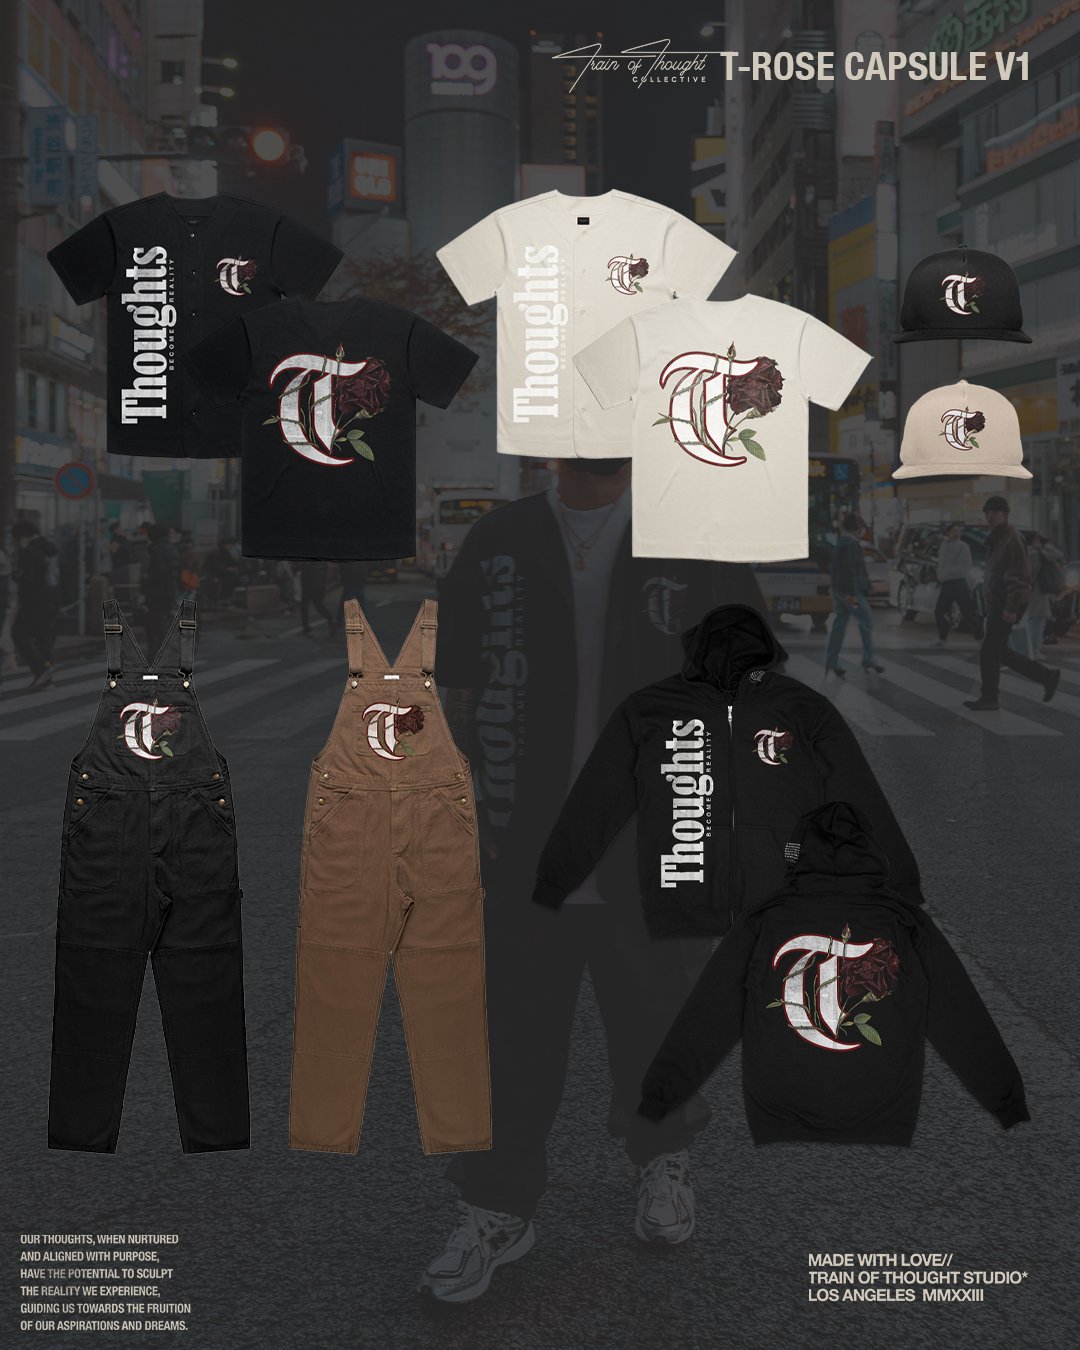 T-Rose Capsule V1 - trainofthoughtcollective